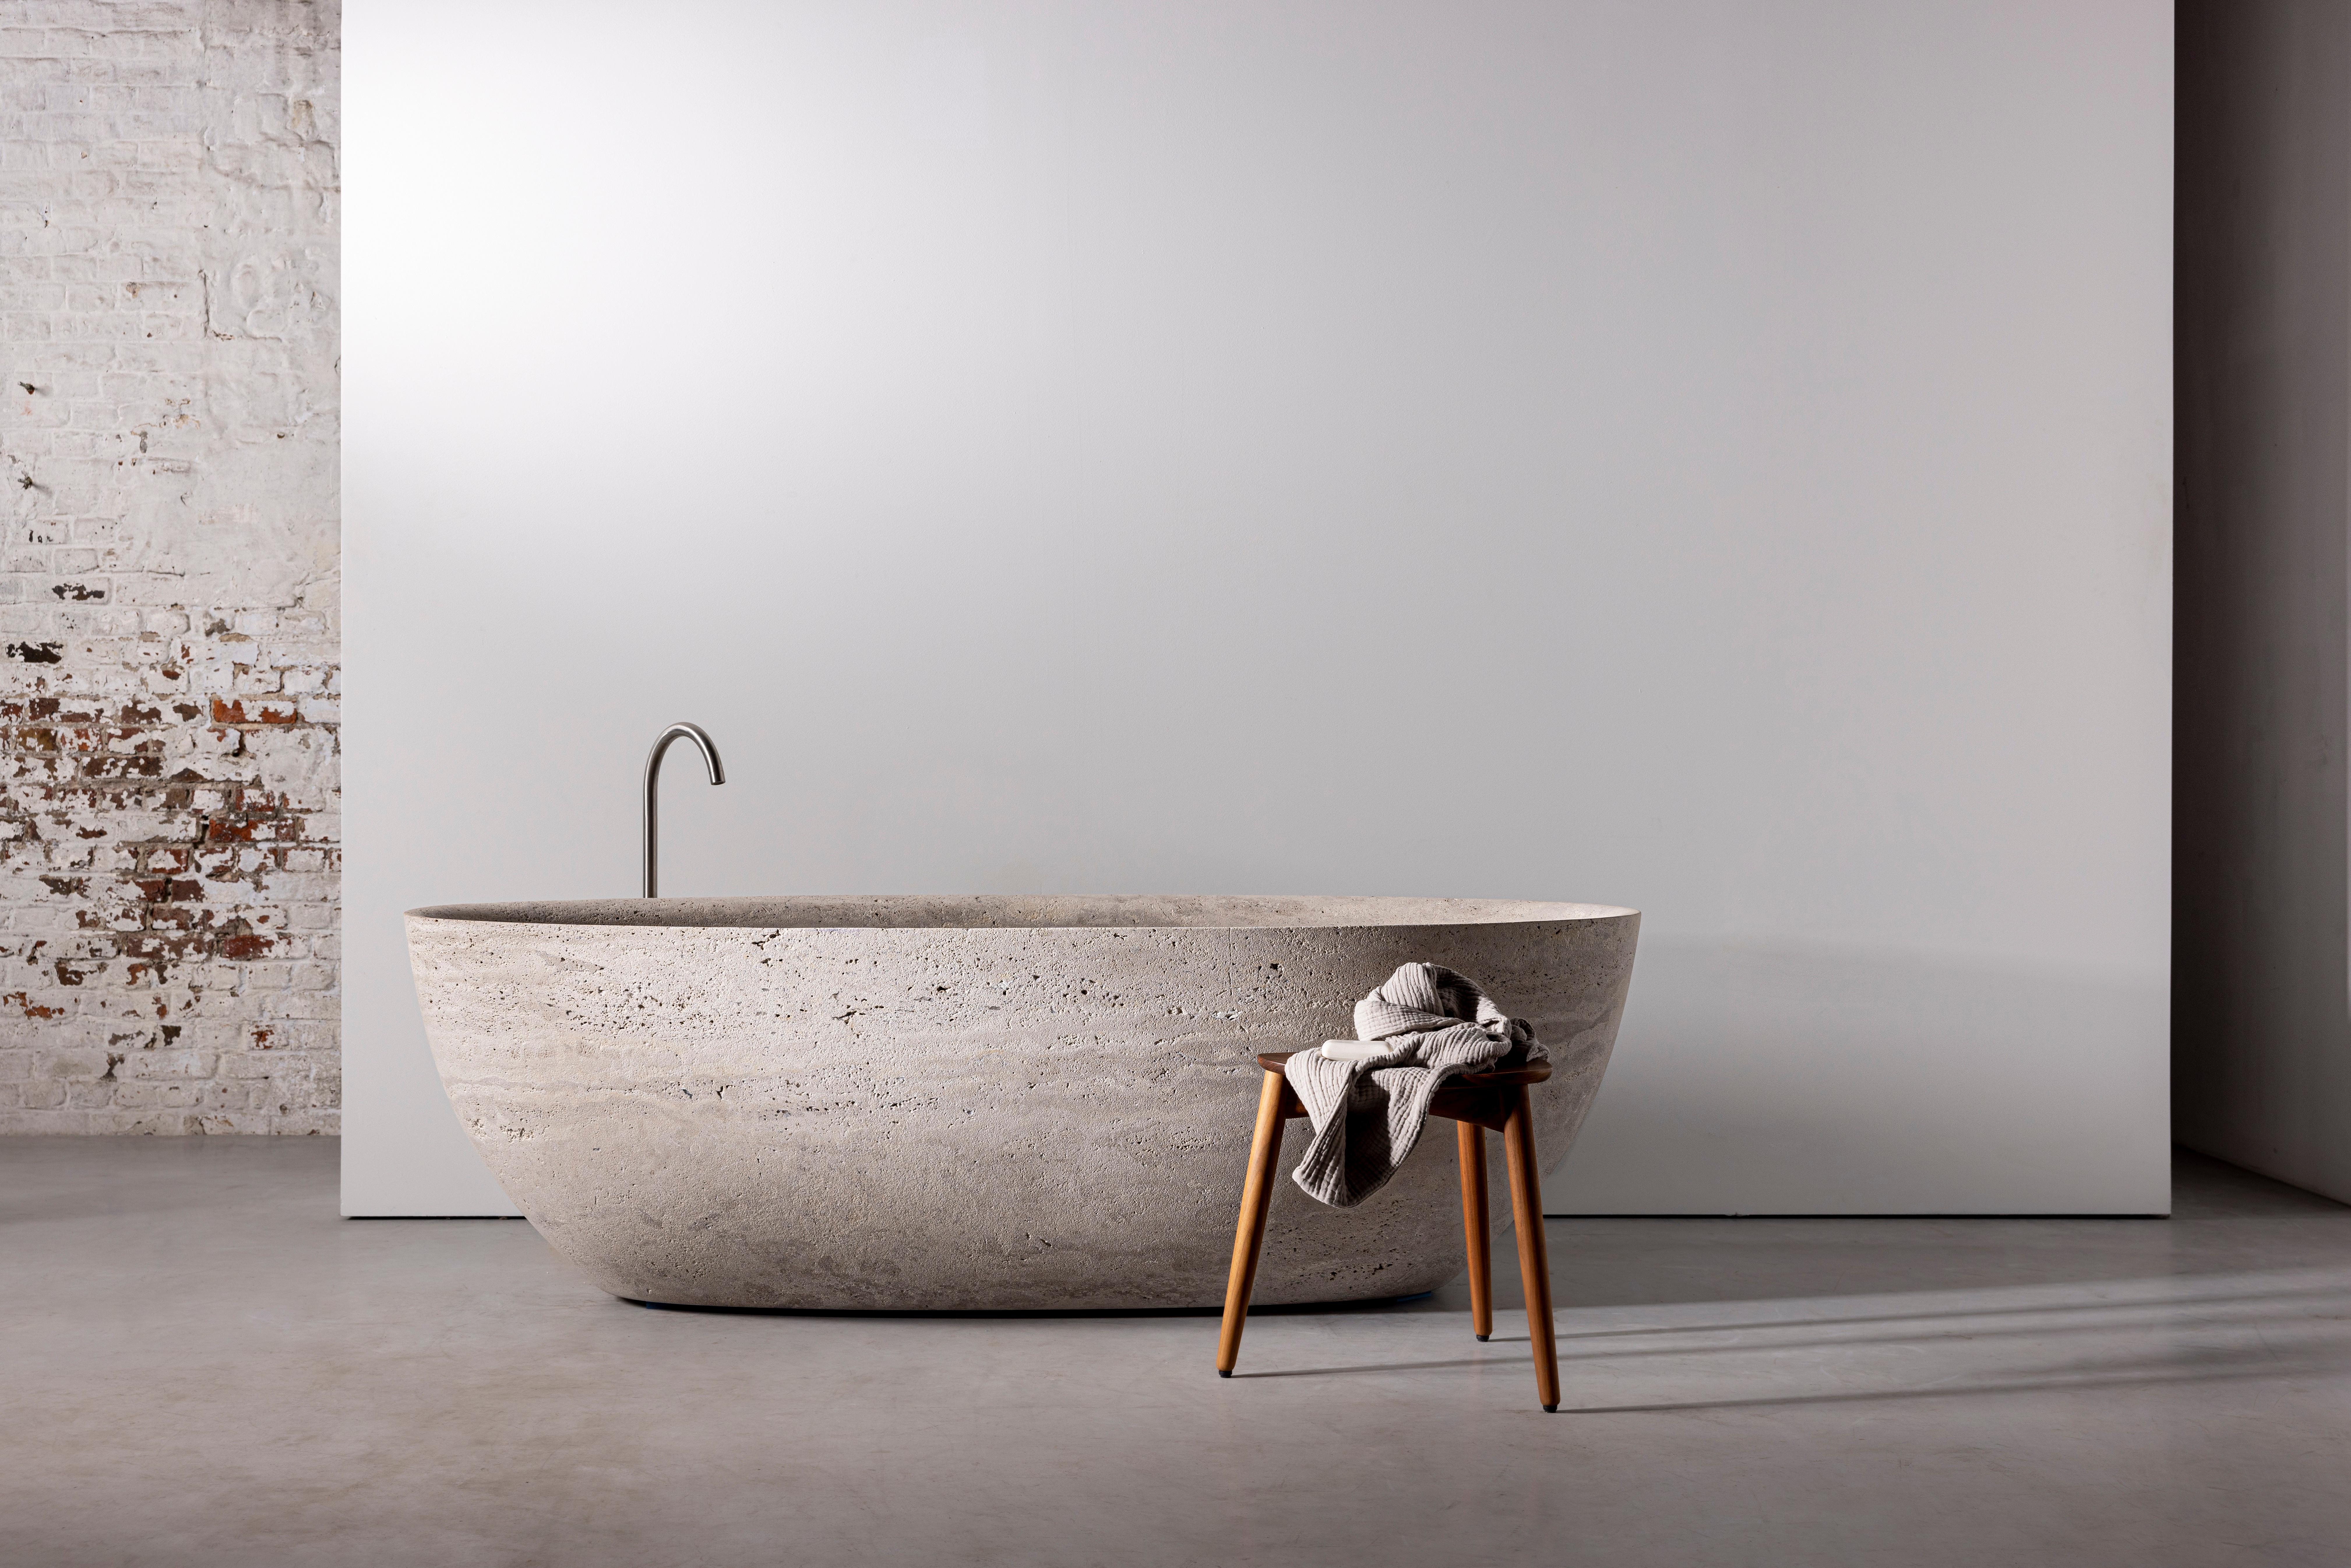 Extra large stone bathtub by Studio Loho
Dimensions: D 85 x W 190 x H 57 cm
Materials: stone
Other stone types are possible upon request.
Available in 2 sizes: 175cm, 190cm.

The perfect bath requires the right stone. This stone was selected